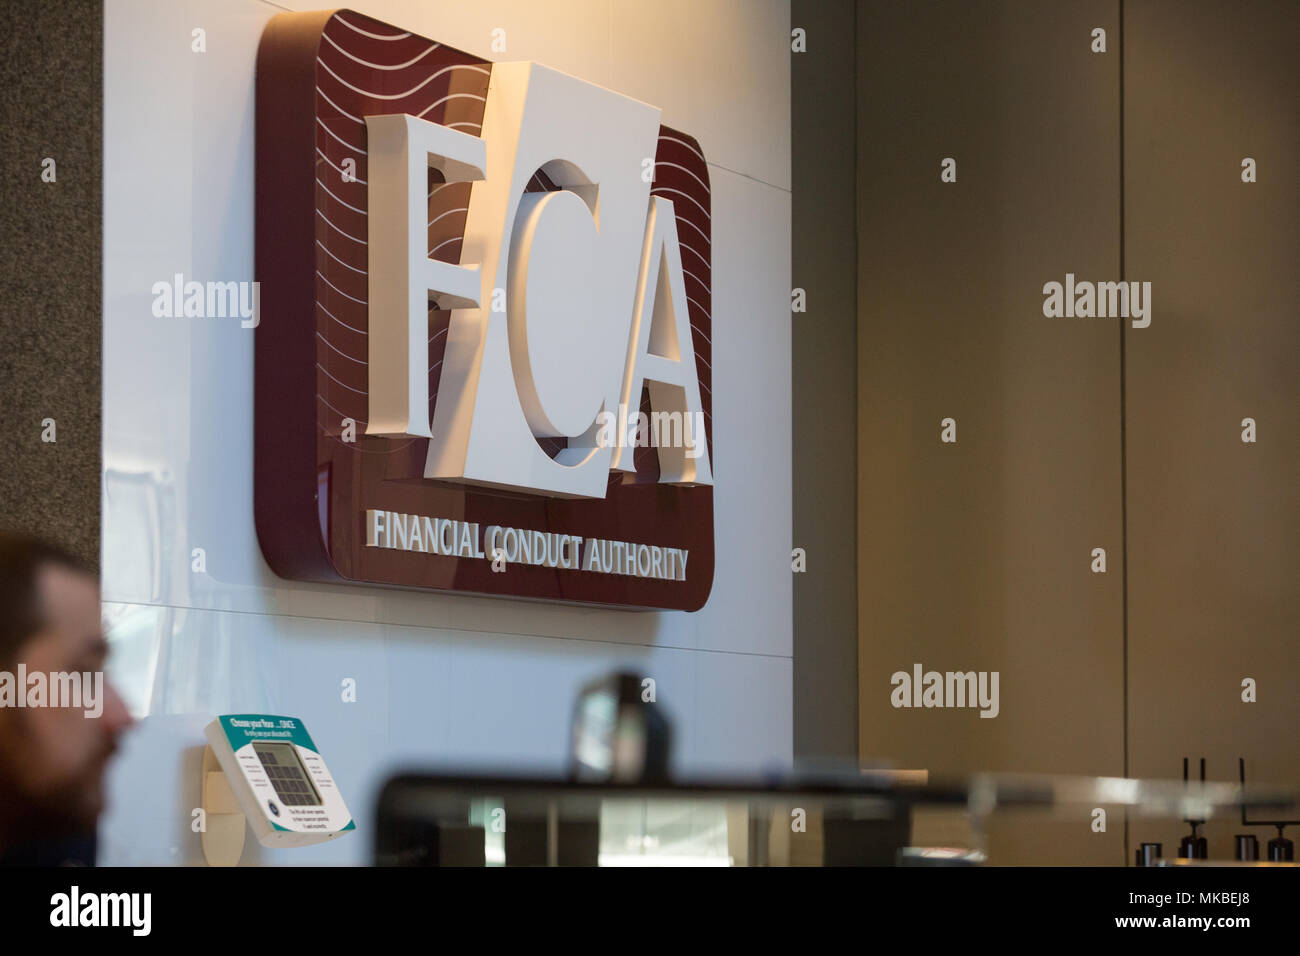 Financial Conduct Authority (FCA) offices, North Colonnade, Docklands, London Stock Photo